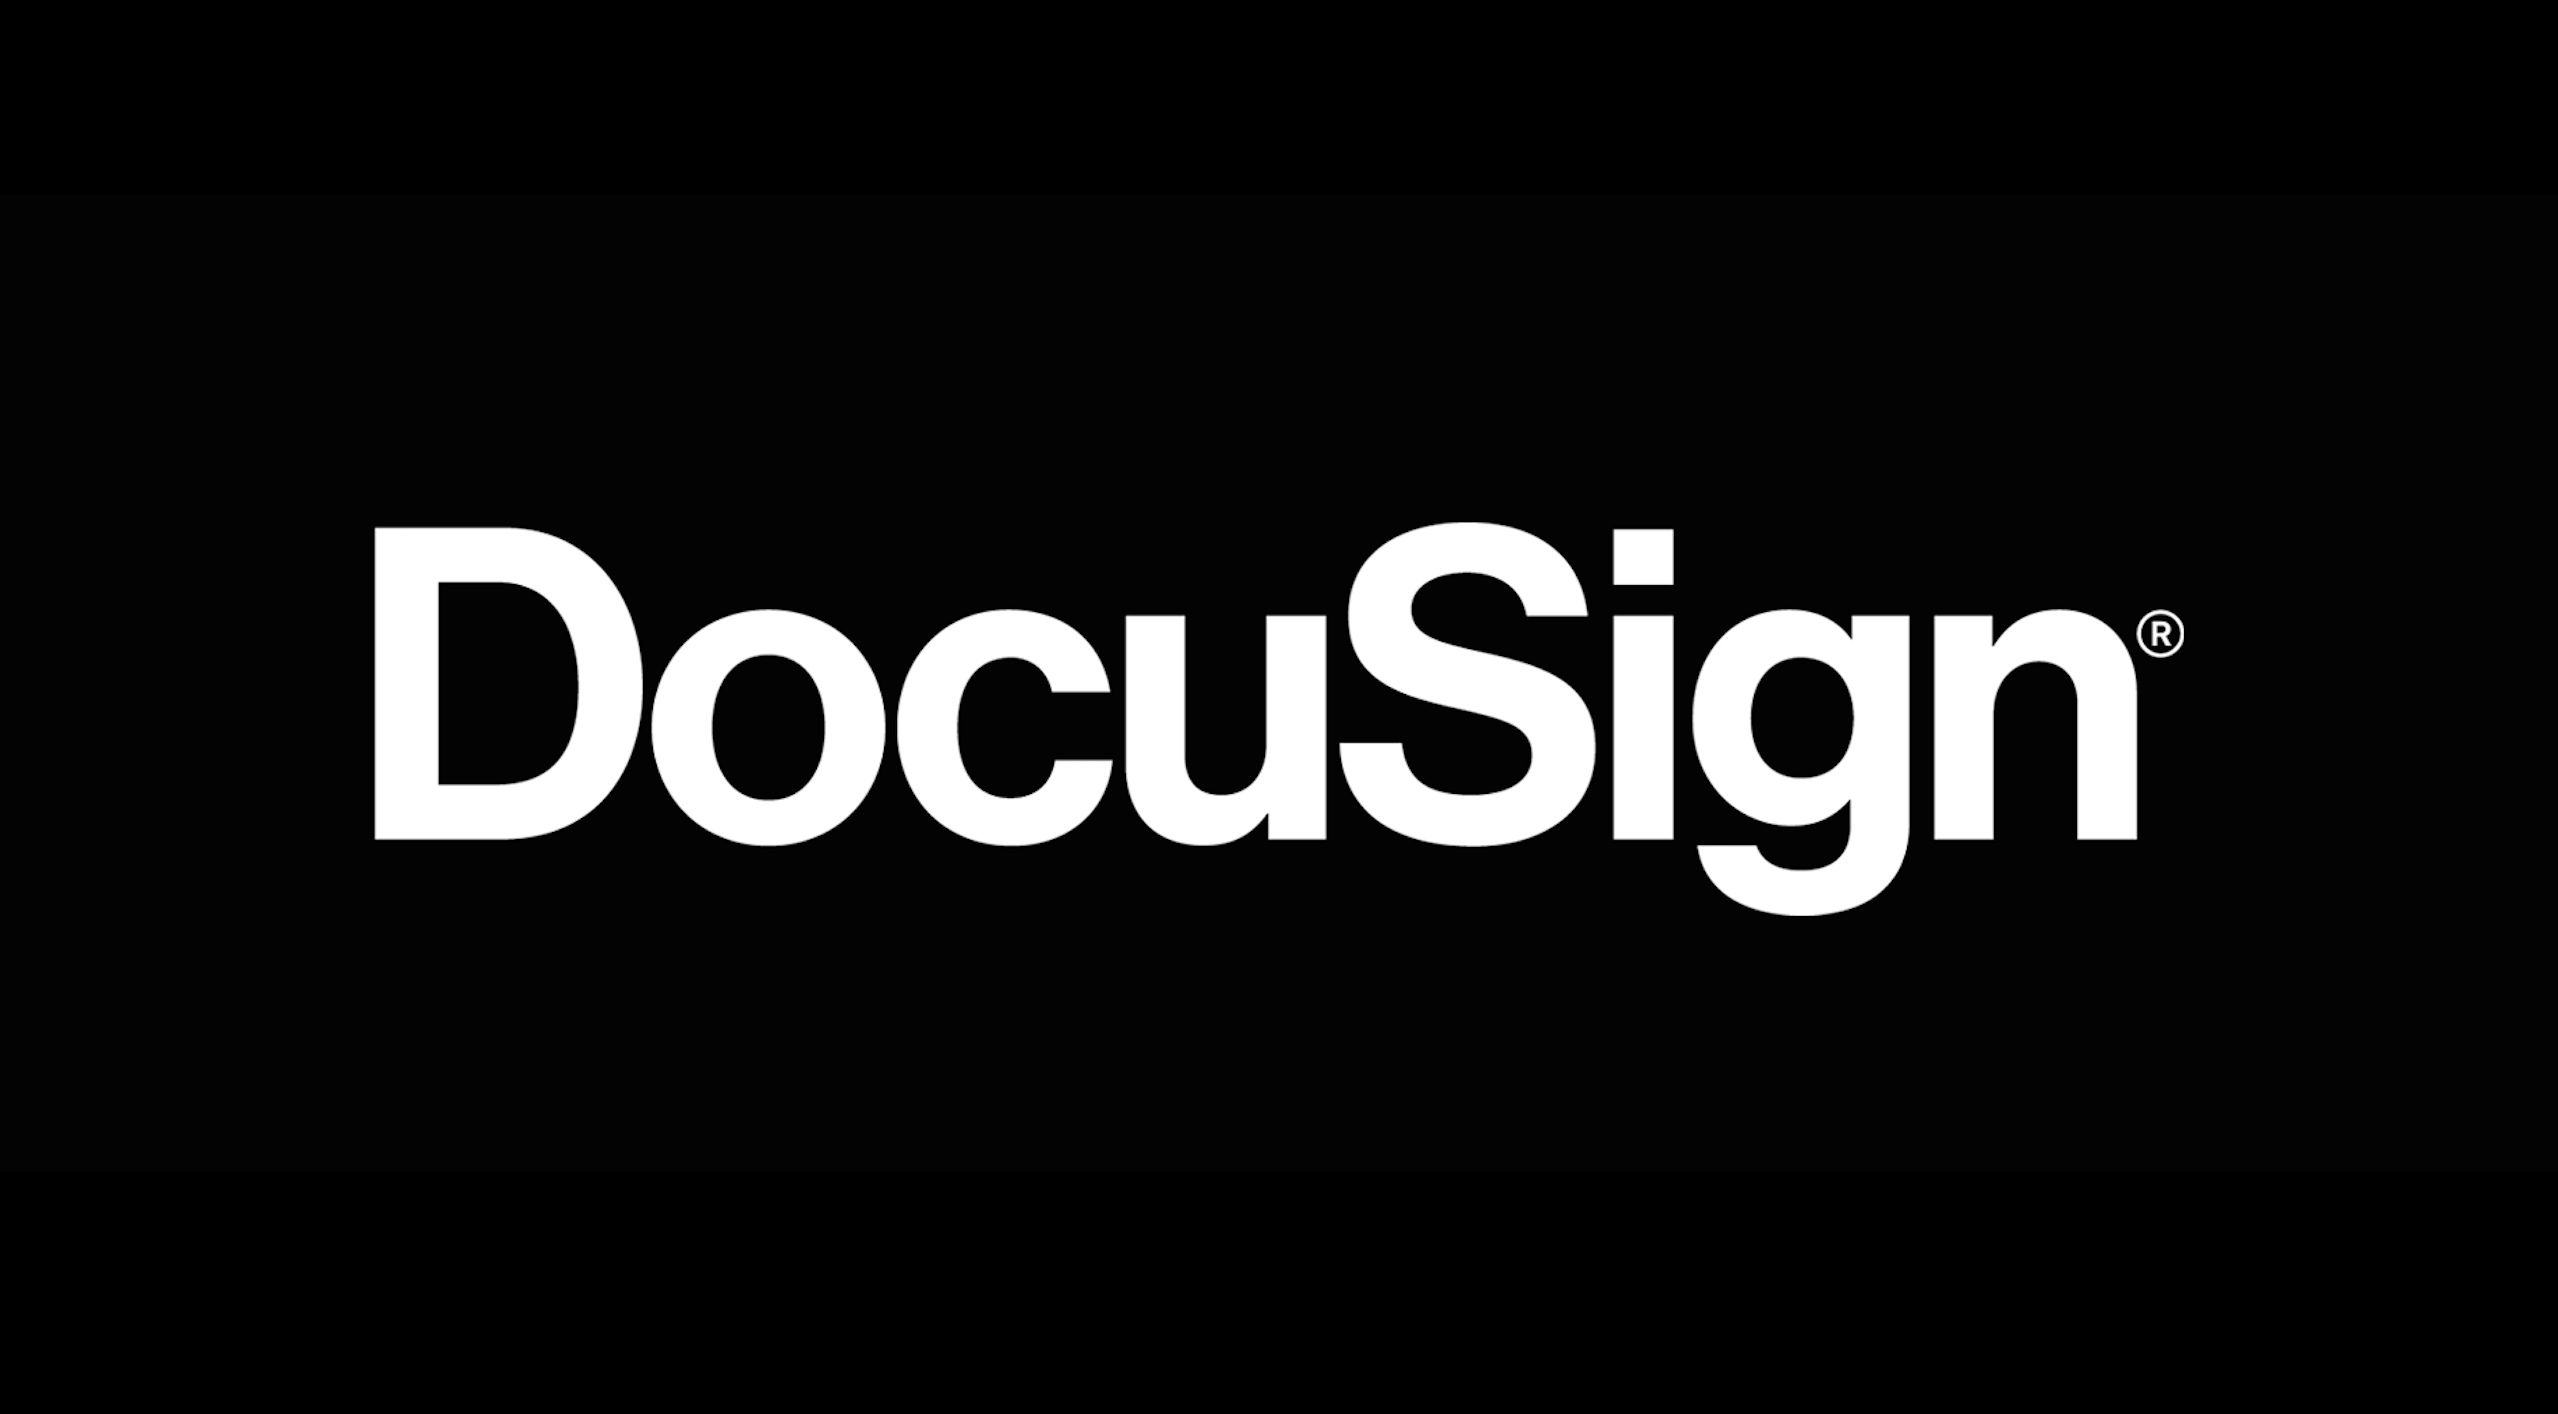 Sell DocuSign, Buy Box: Digital Document Landscape Is 'Competitive,' Analyst Says